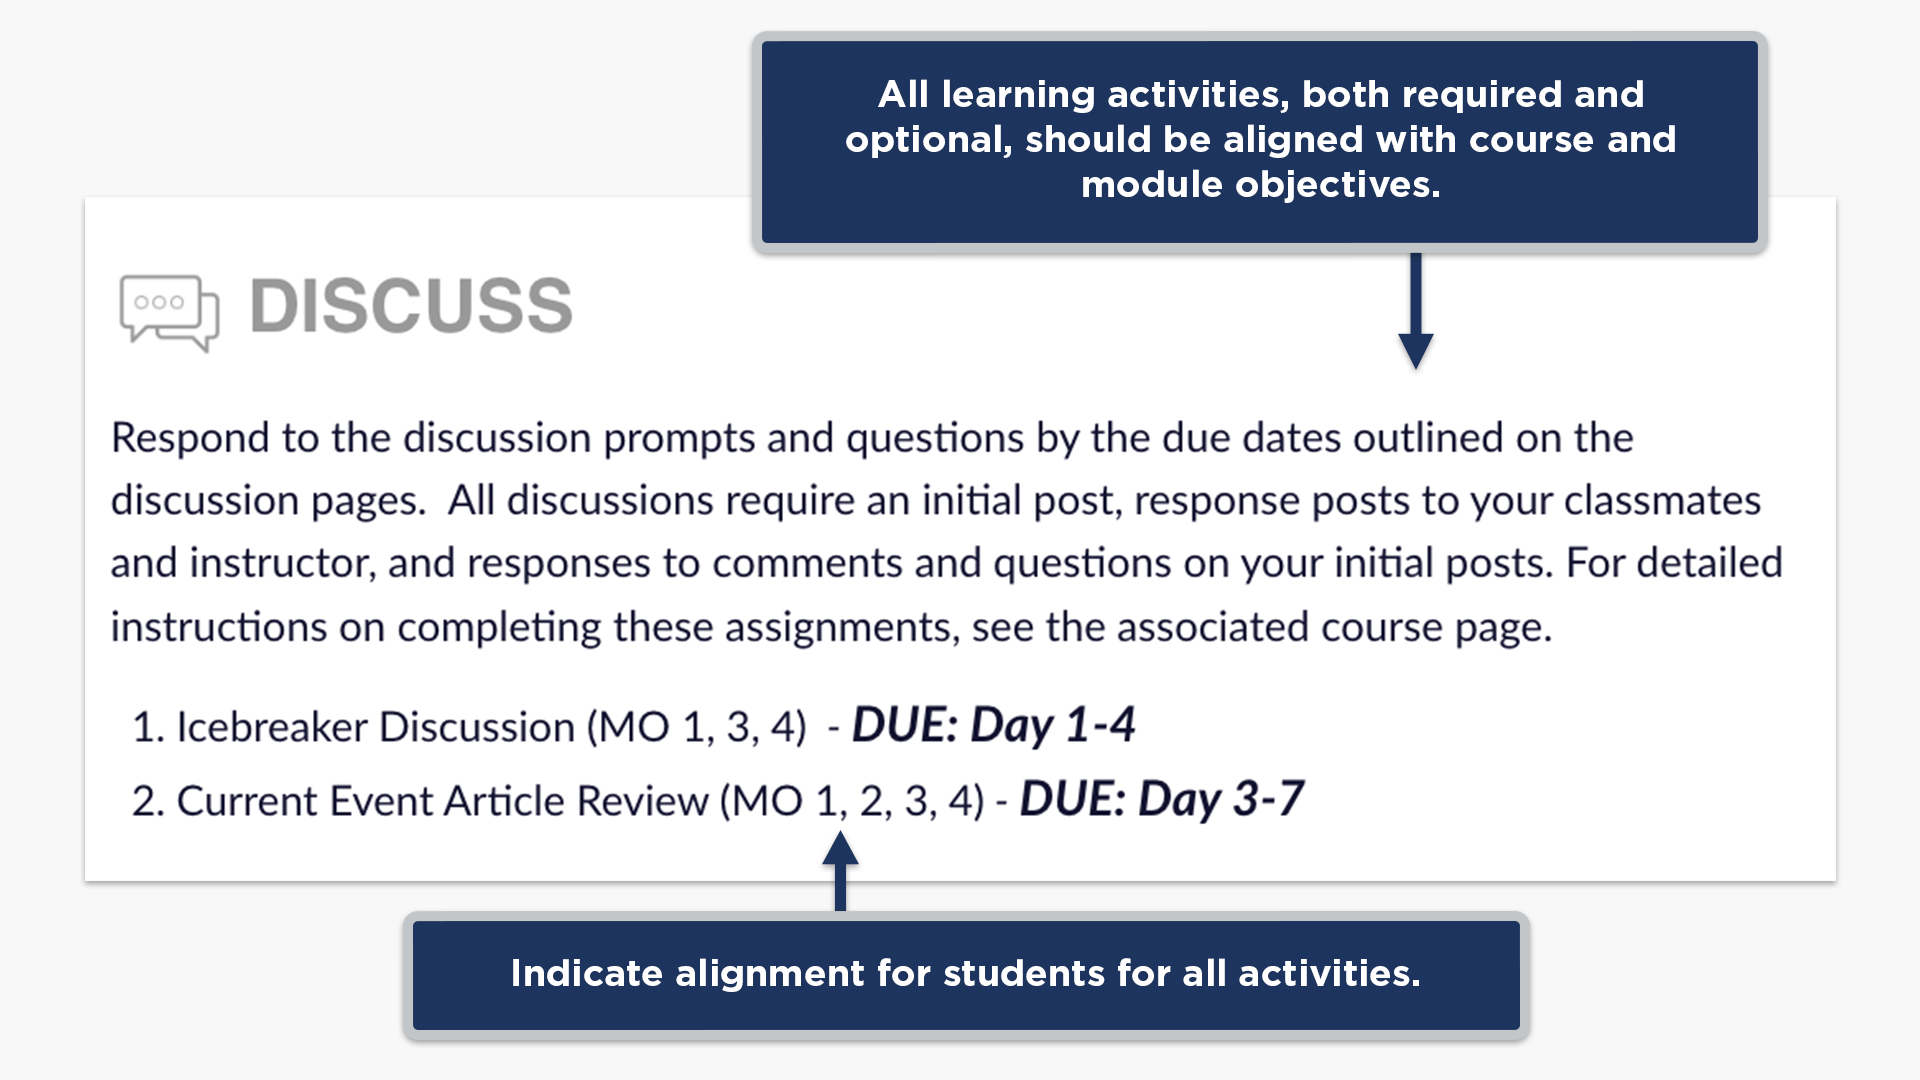 All learning activities, both required and optional, should be aligned with course and module objectives. Indicate alignment for students for all activities.